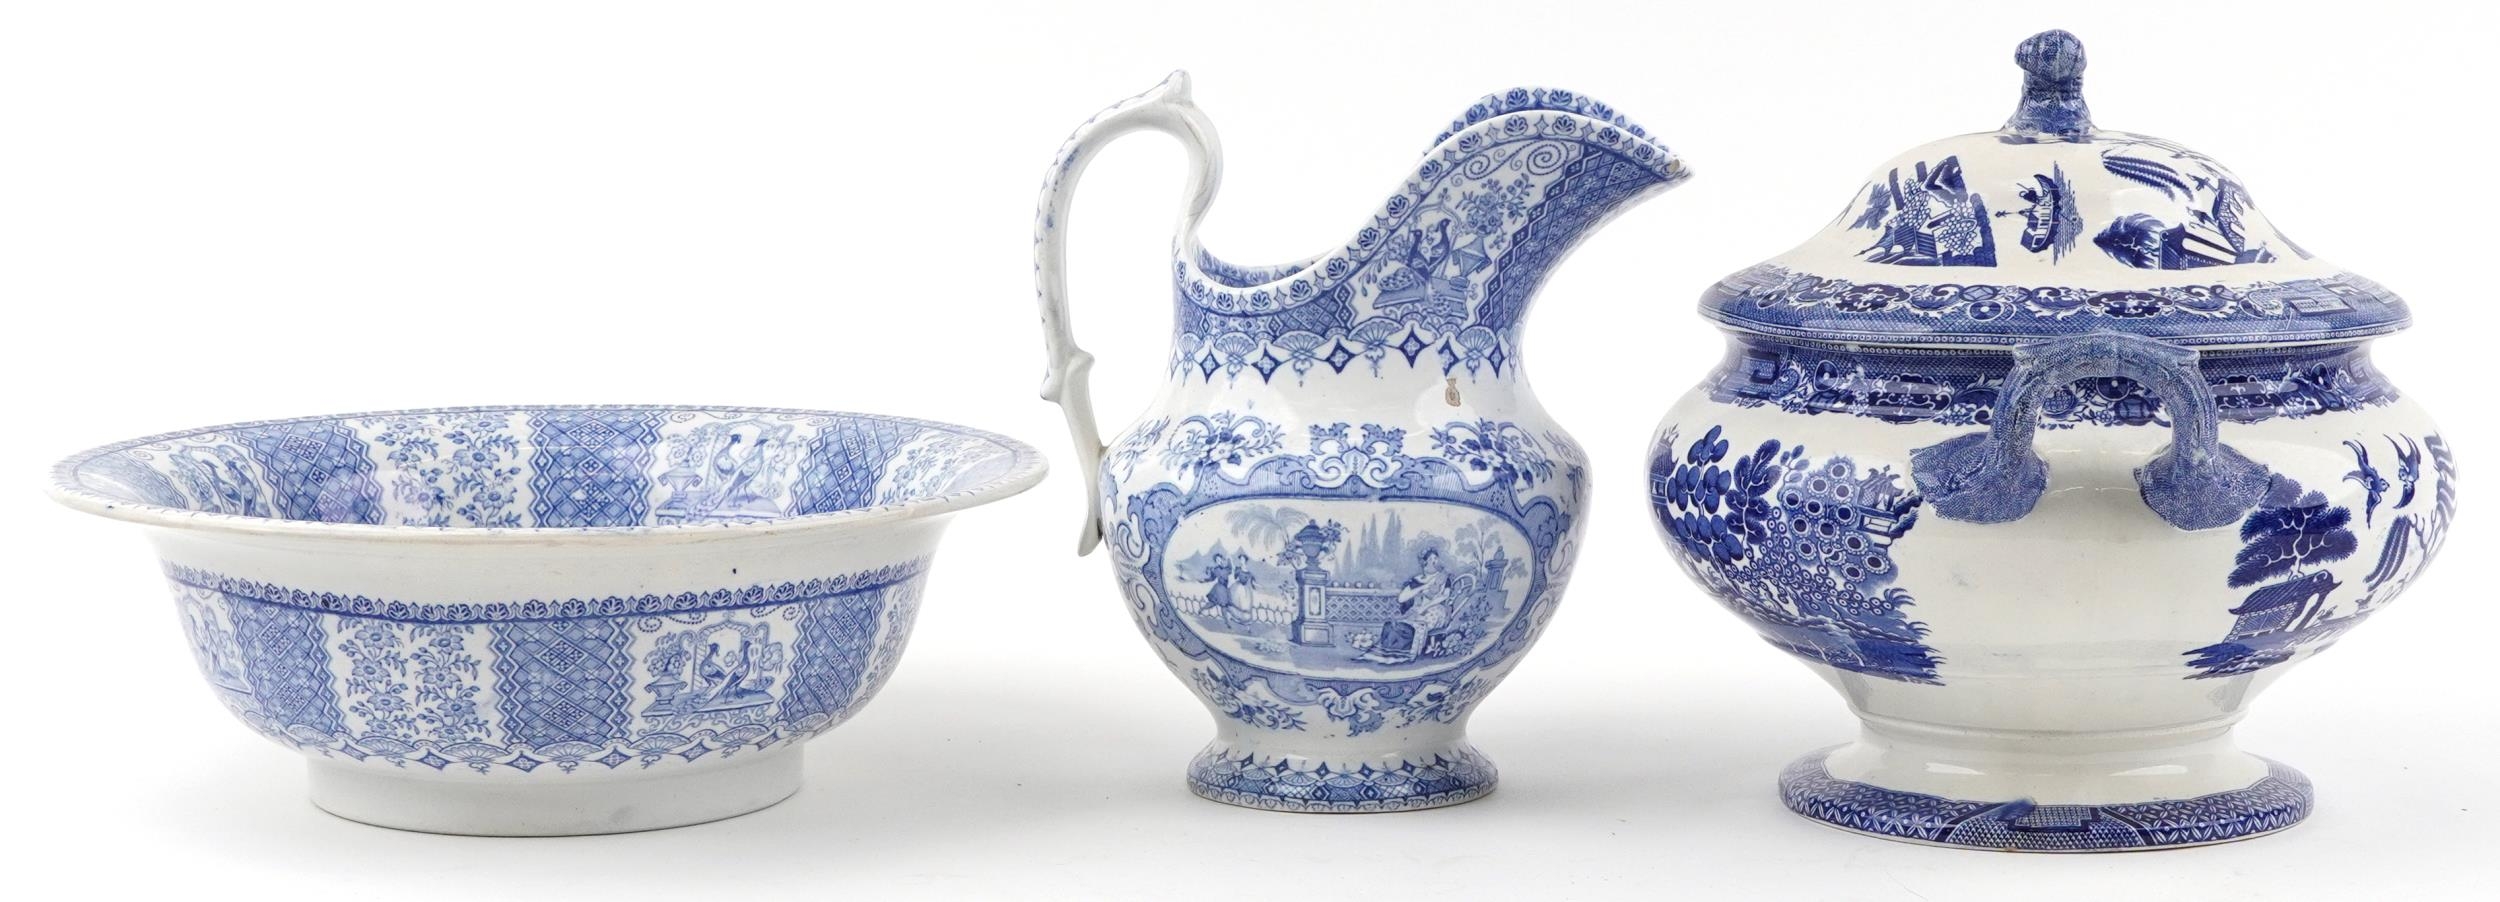 Victorian blue and white wash jug and basin, transfer printed in the Tyrolienne pattern and a - Image 7 of 10